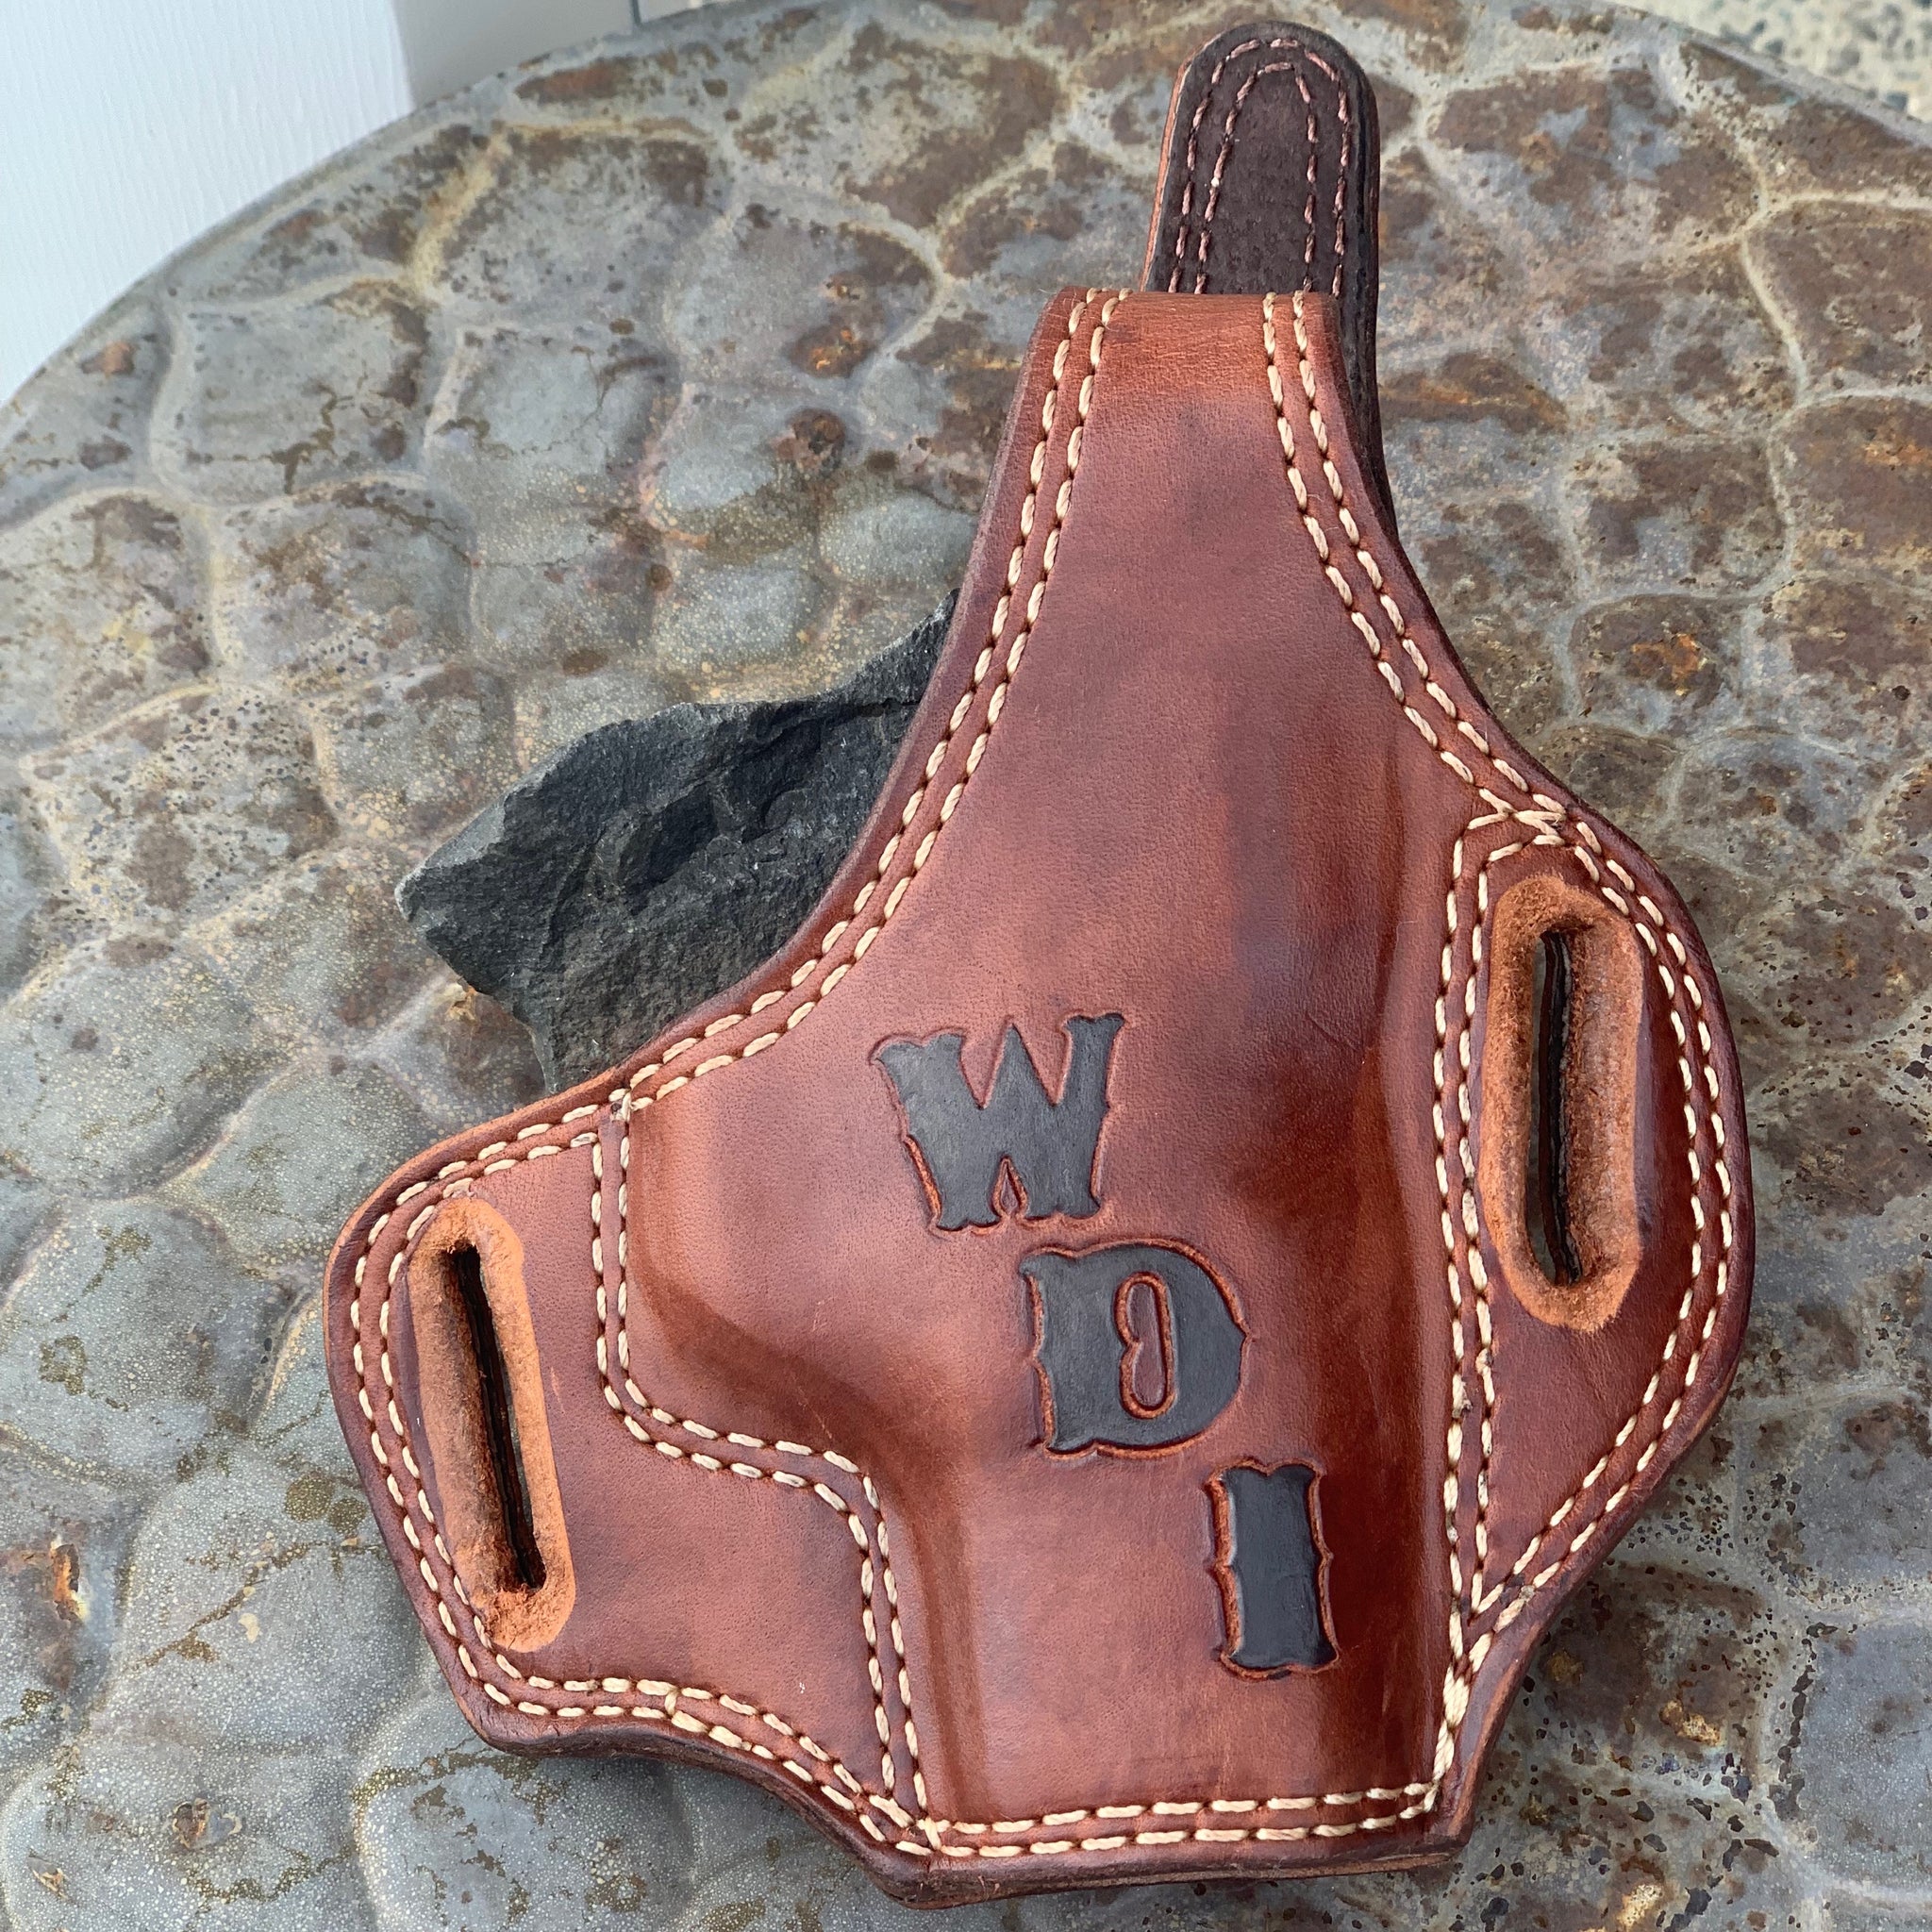 Panhandle Red Leather Company, Post Falls, Idaho. North Idaho's Best Leather Products.Leather Goods Shop, Leather Holsters, Leather Belts, Leather Purses, Leather Products, Silver Jewelry, Turquoise Jewelry in Post Falls, Idaho,